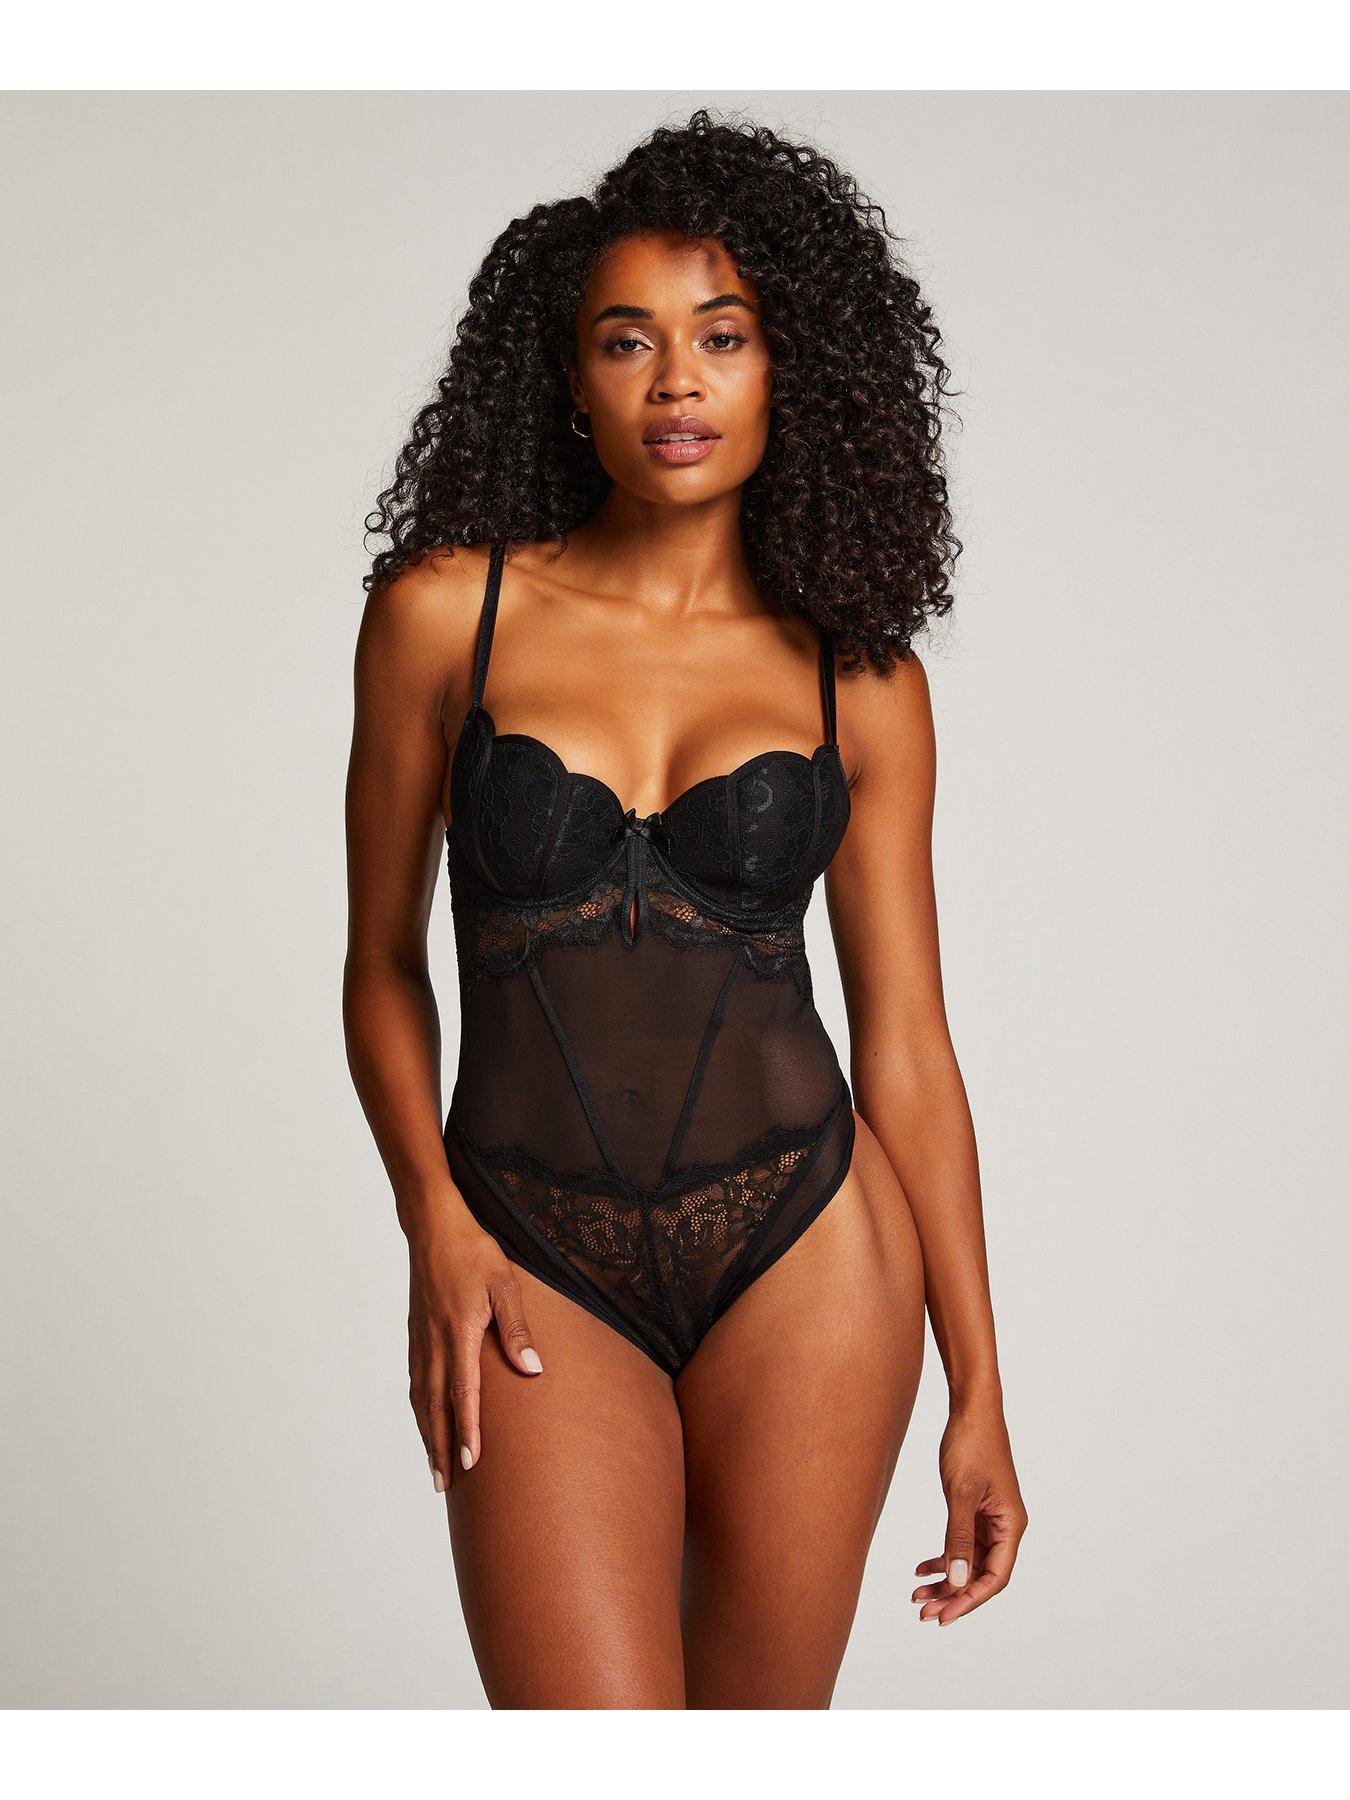 Shopping for Bodies & Bustiers? Find yours at Hunkemöller